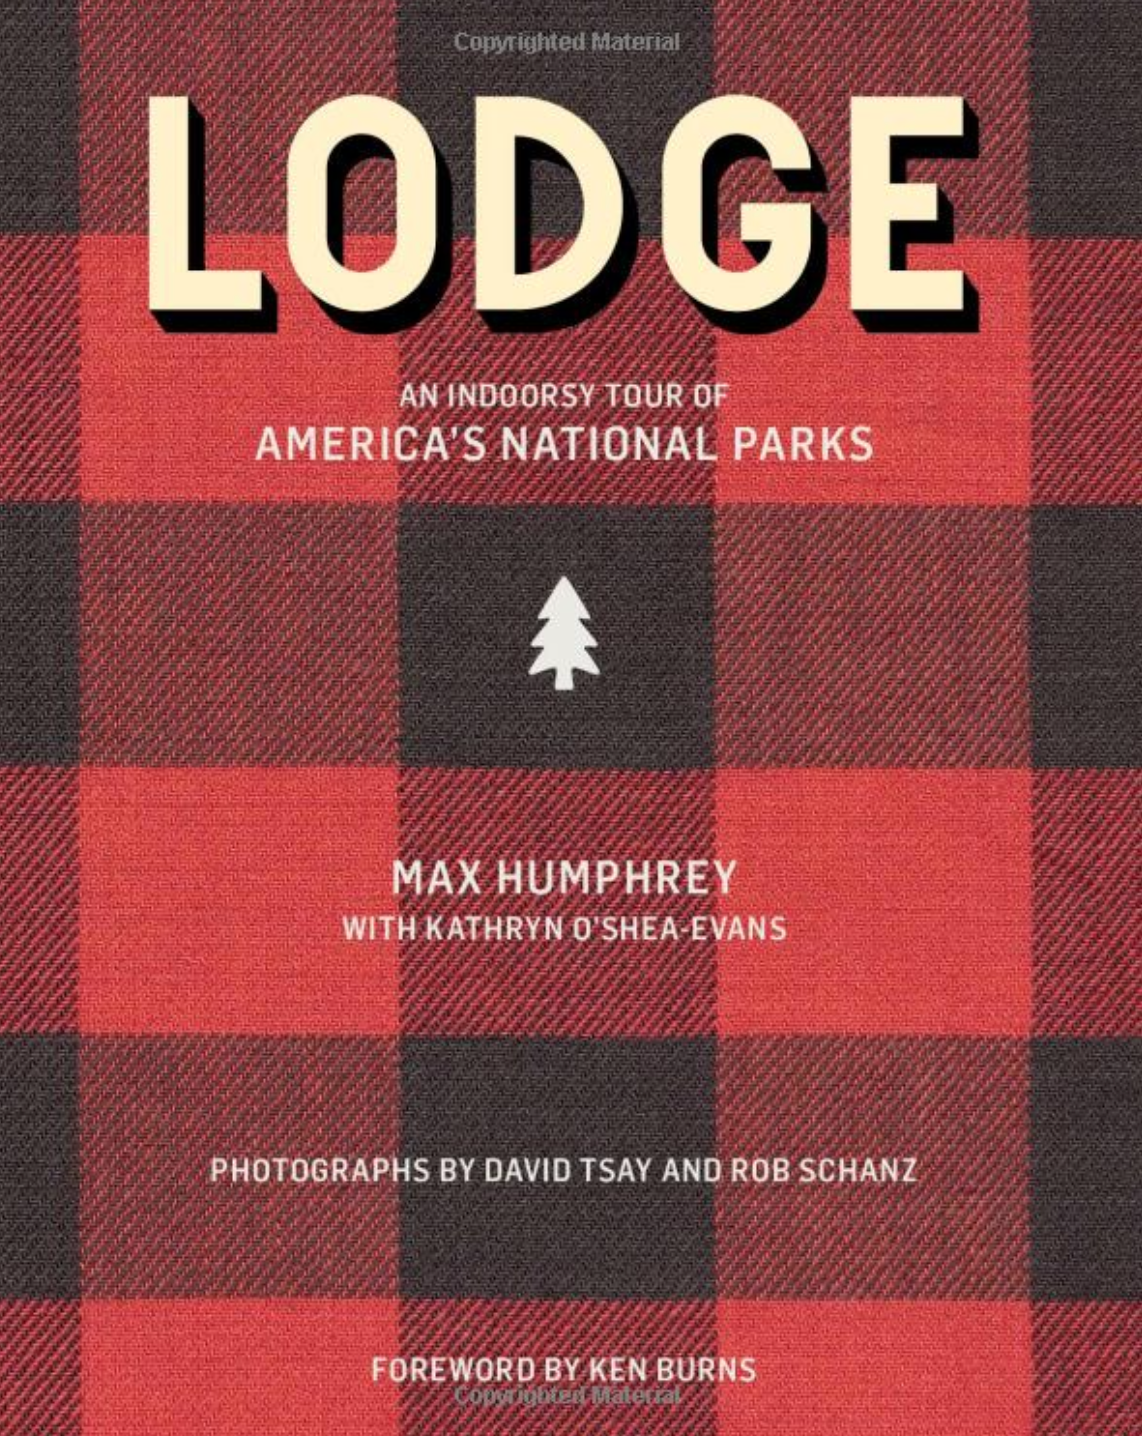 Lodge: An Indoorsy Tour of America’s National